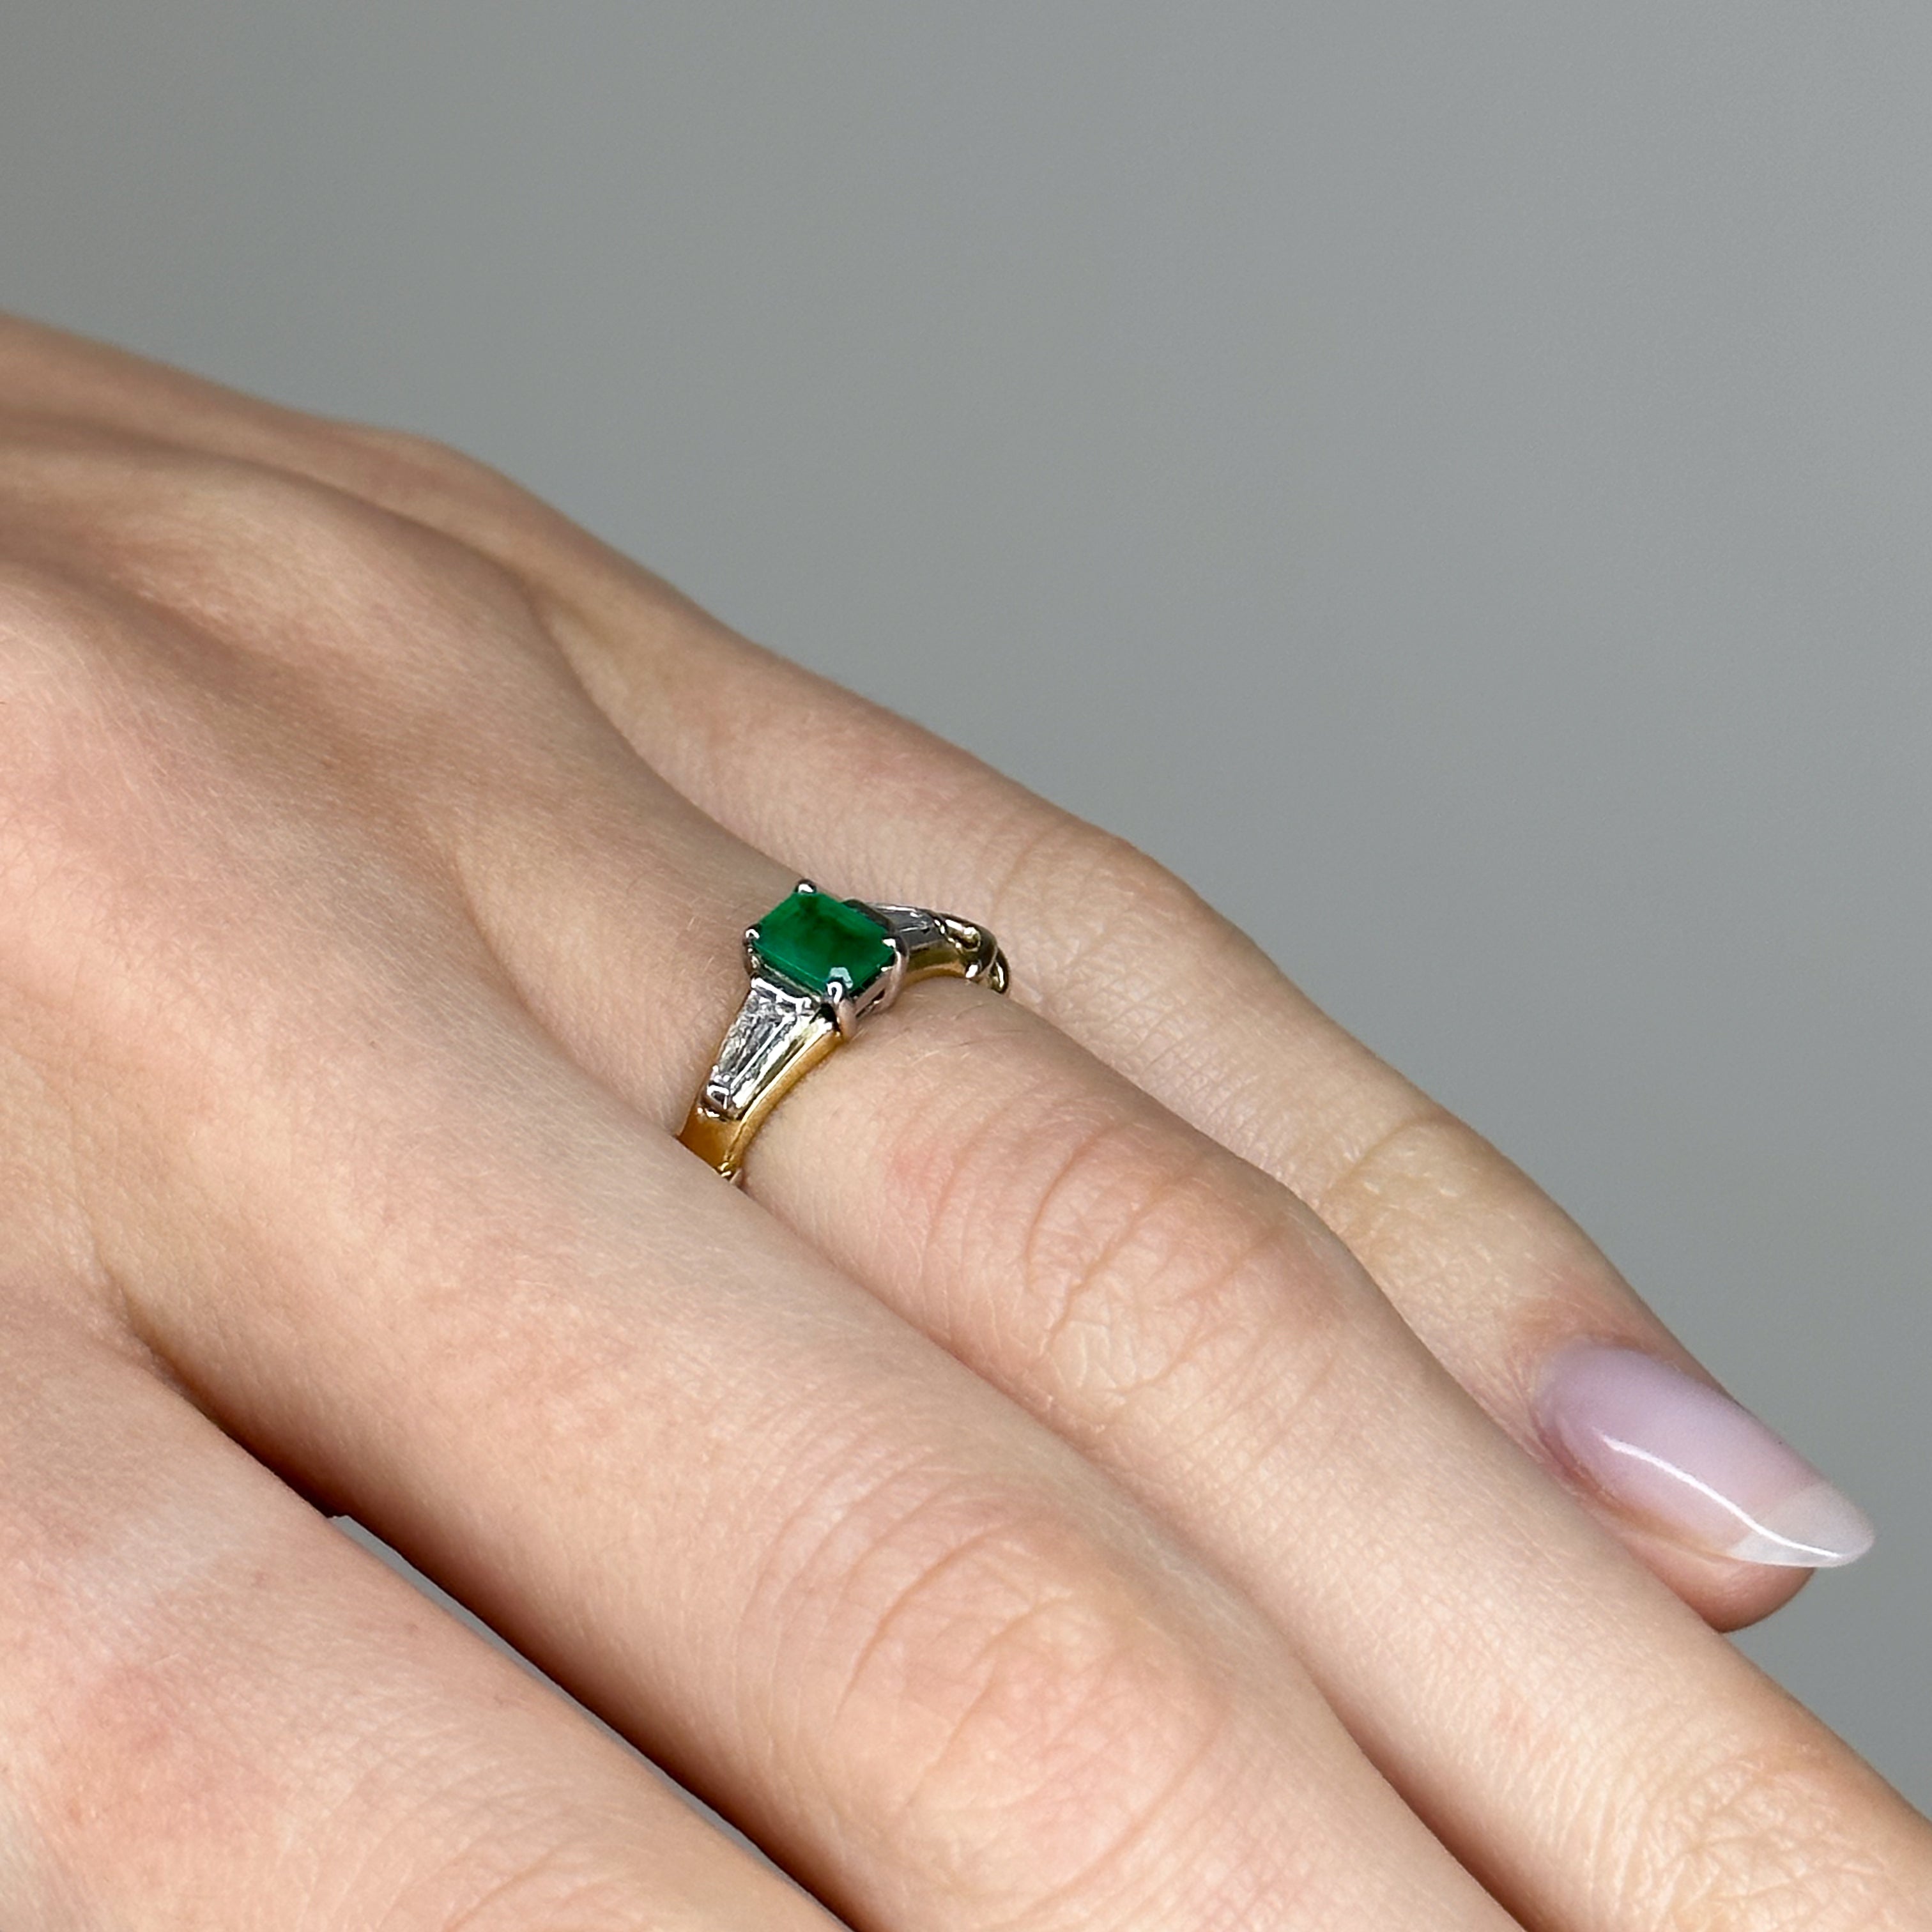 0.65ct Emerald and Diamond Trilogy Ring in Yellow Gold